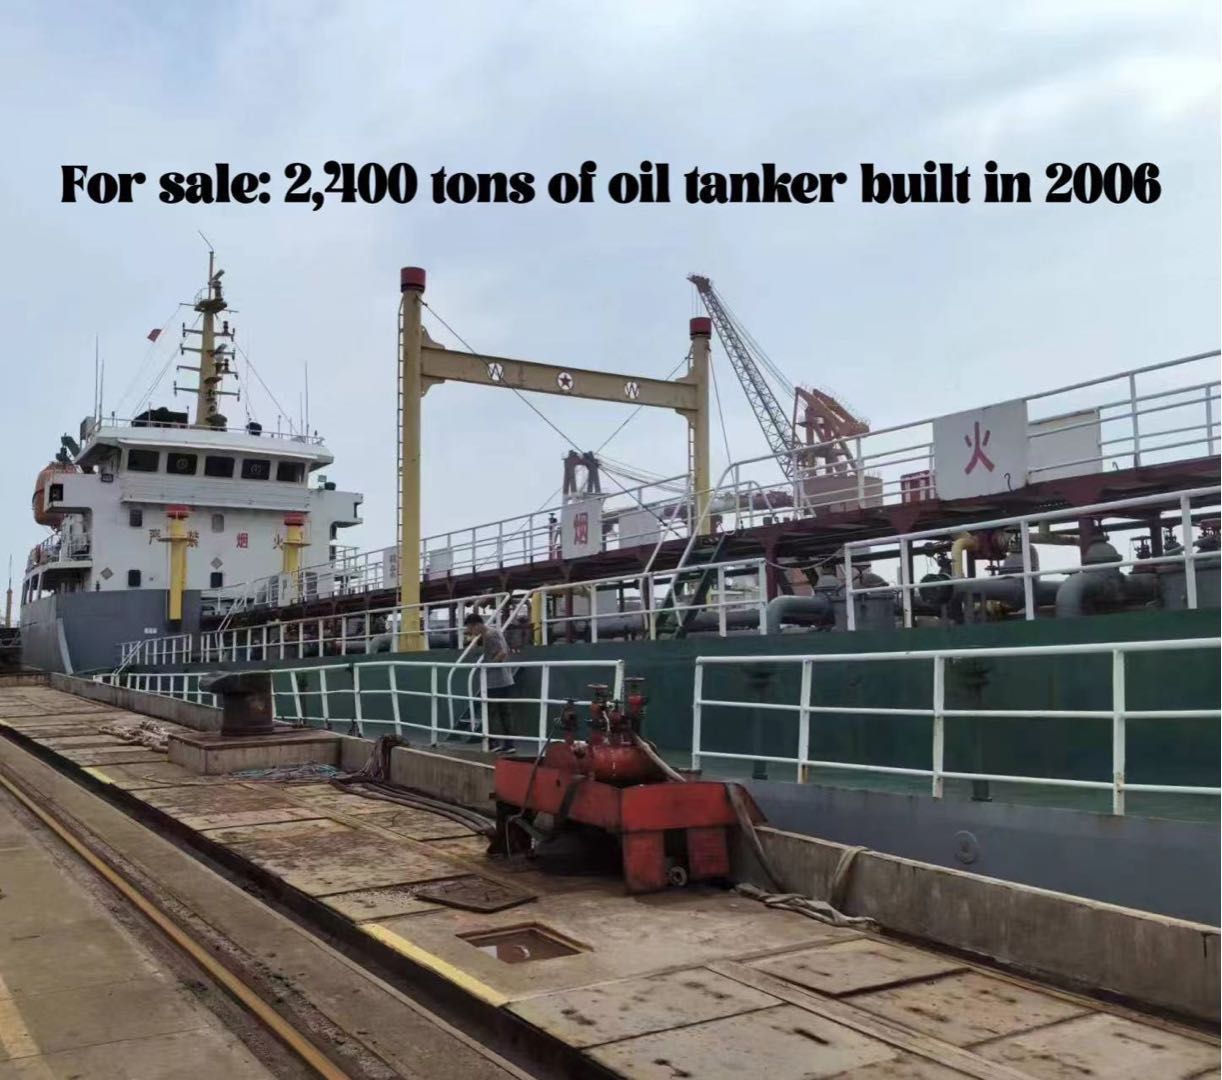 For sale: 2,400 tons of oil tanker, built in Zhejiang, China in 2006